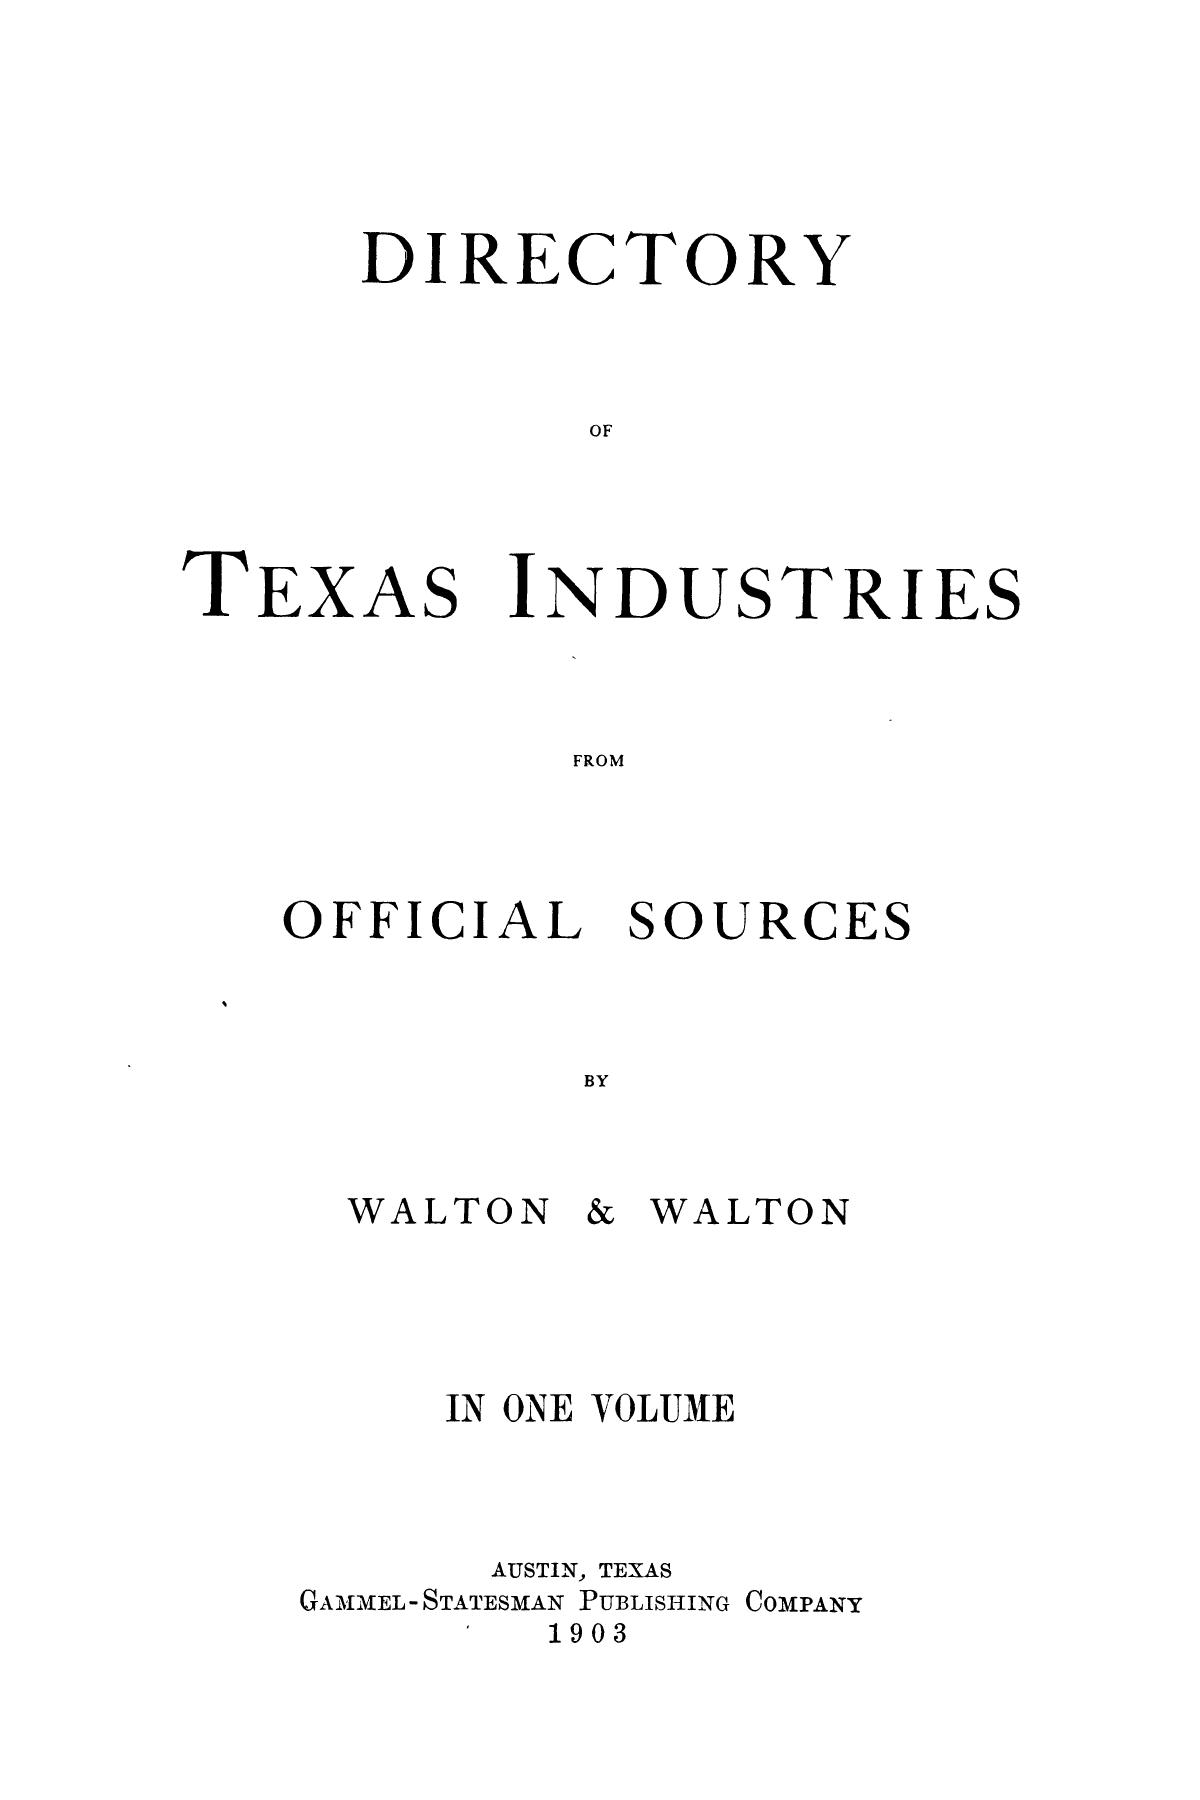 Directory of Texas Industries from Official Sources
                                                
                                                    Title Page
                                                